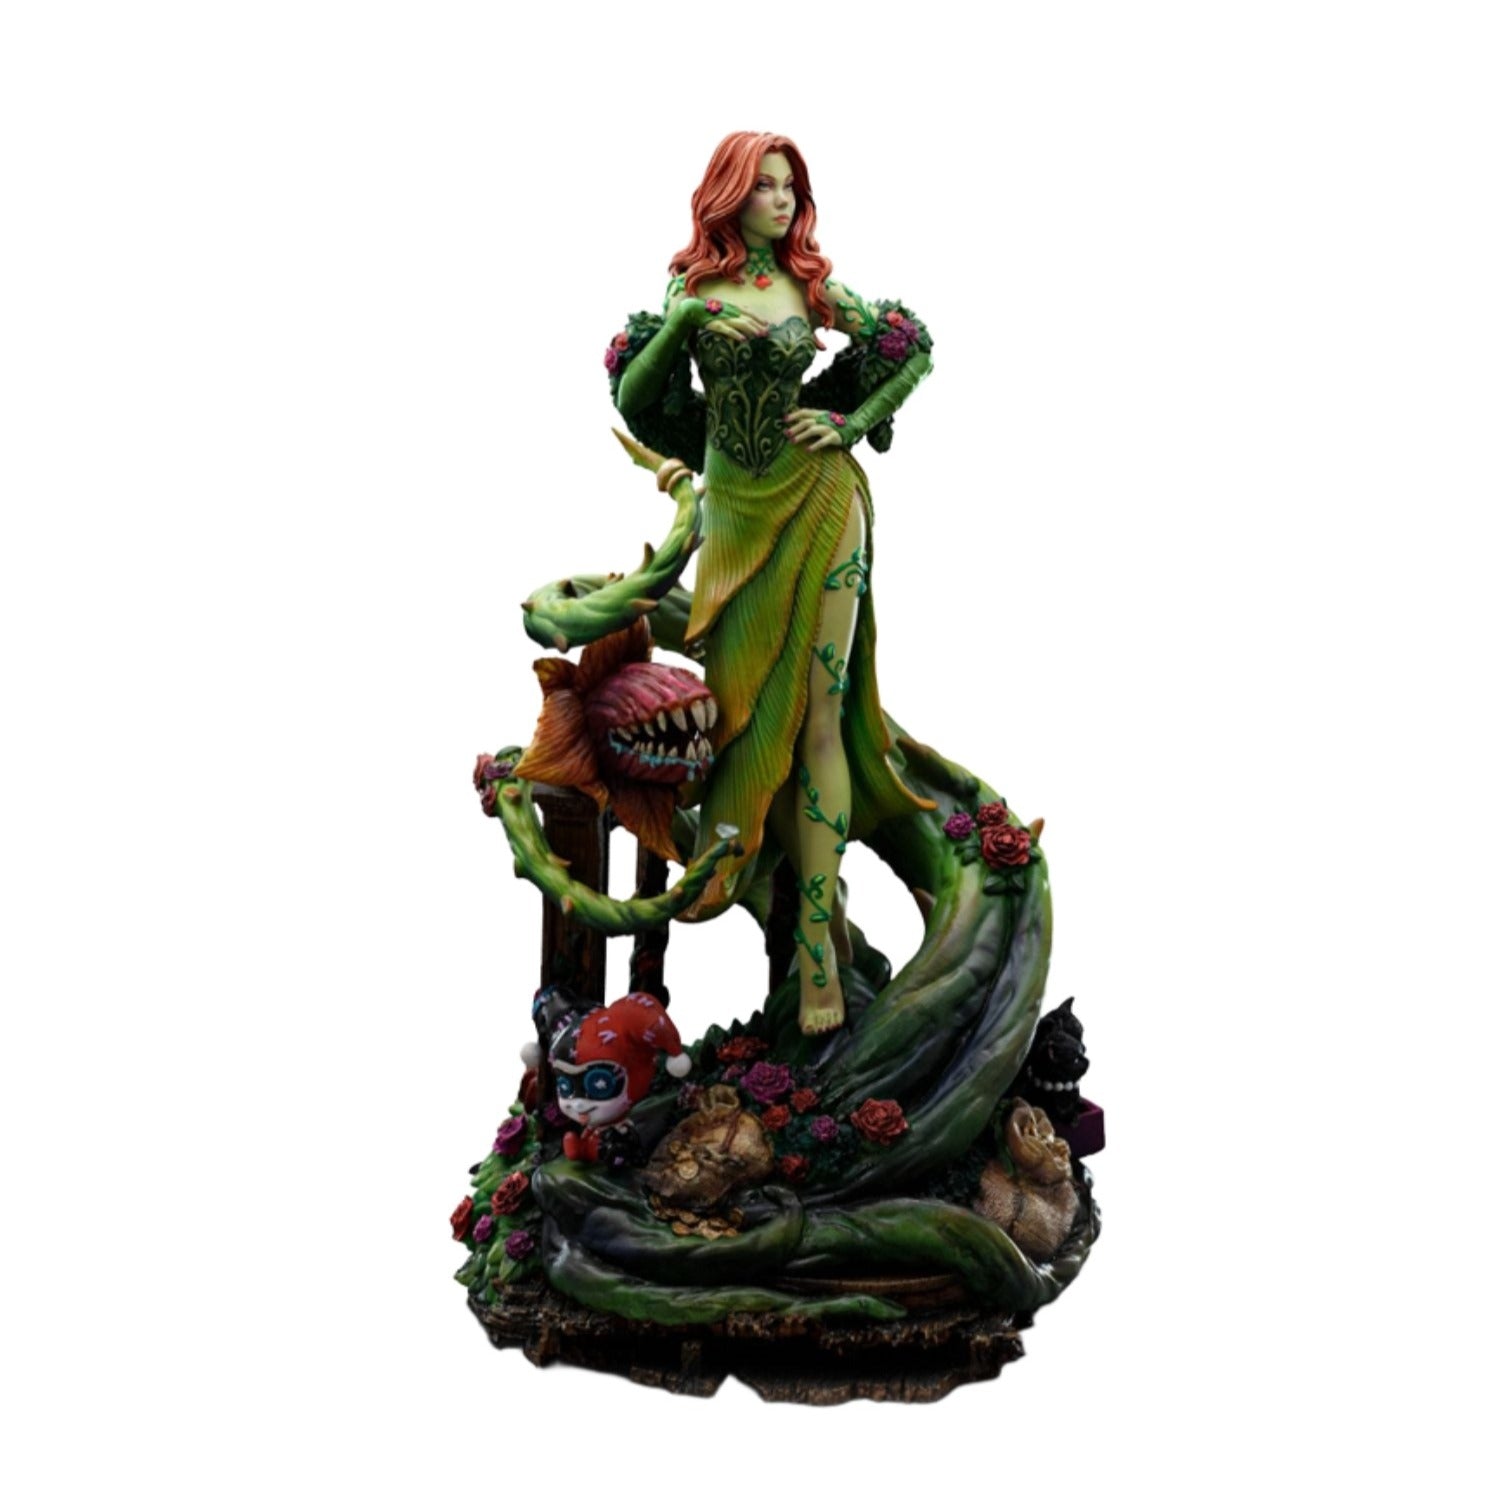 Poison Ivy Deluxe (Gotham City Sirens) Art Scale 1/10 statue